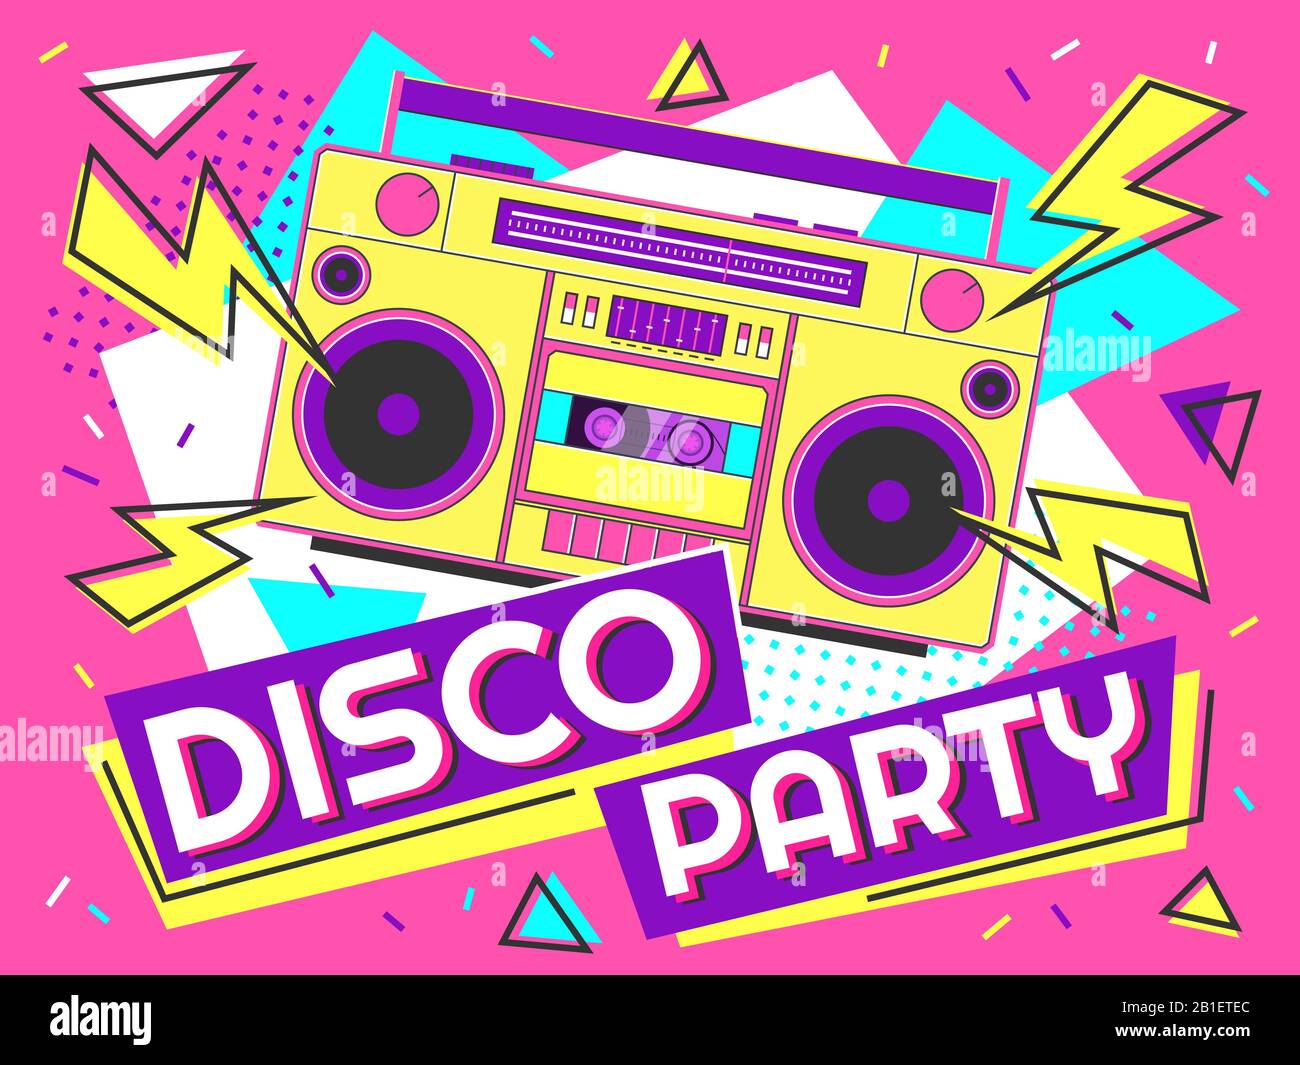 Disco party banner. Retro music poster, 90s radio and tape cassette player funky colorful design vector background illustration Stock Vector